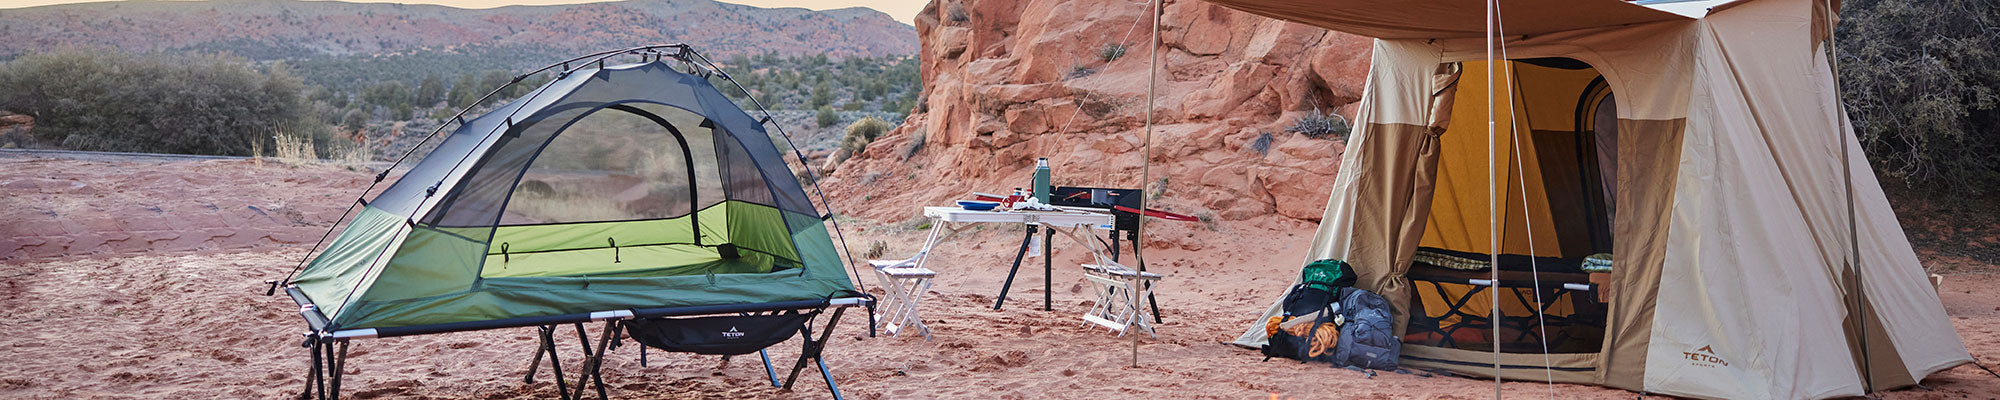 A vista tent and Mesa canvas tent are pictured in a sandy campsite.